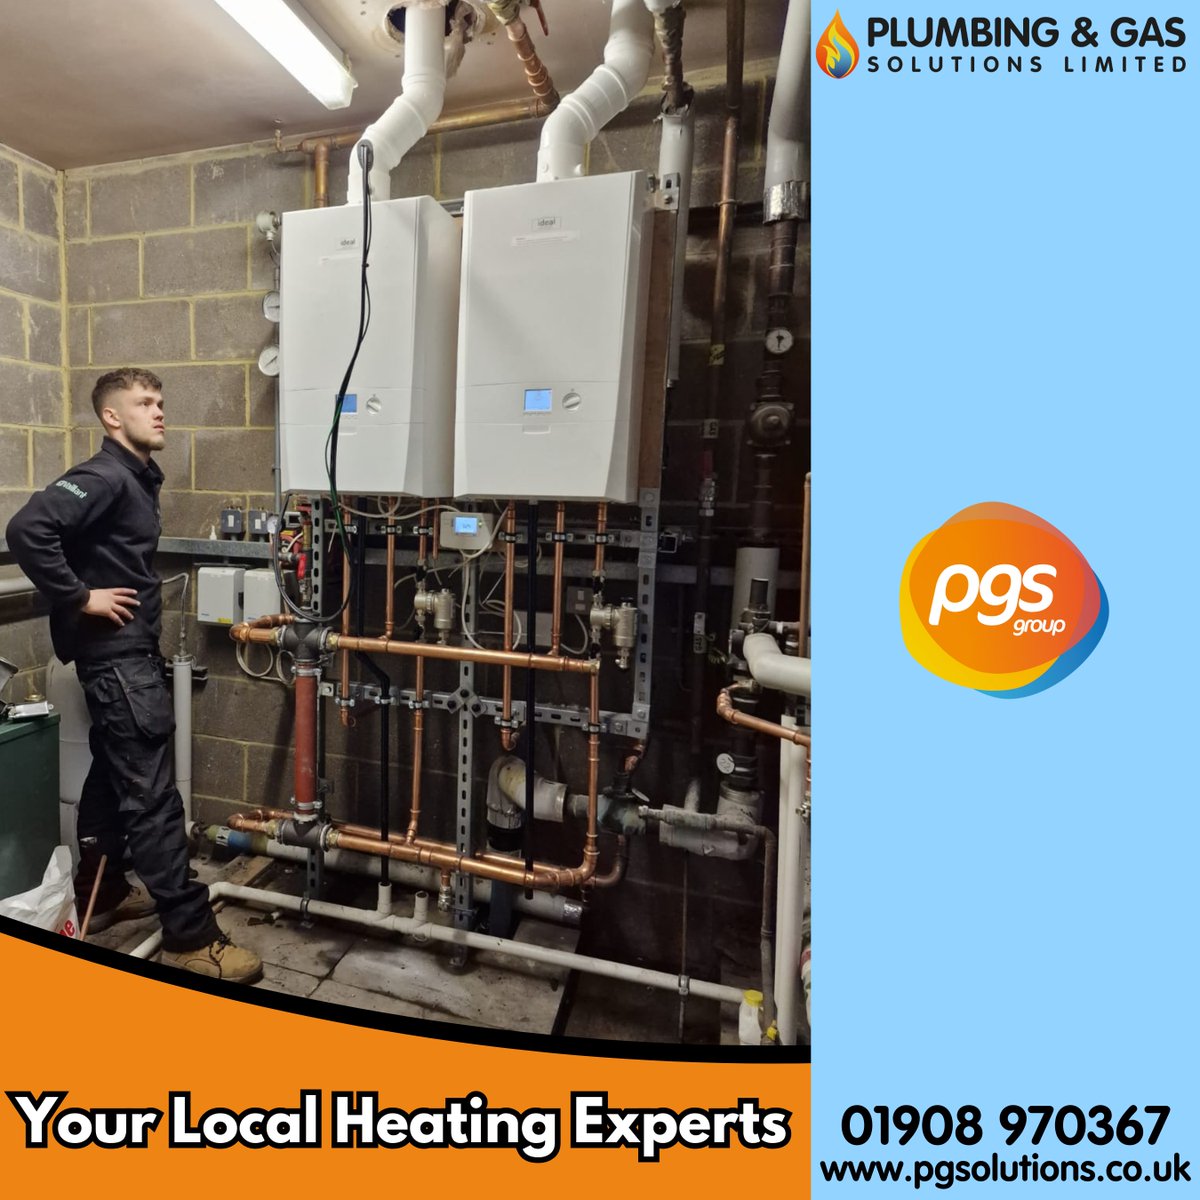 With years of experience, our engineers will support you with everything you need. Whether it's an office building, warehouse, school or hospital, we can support our commercial clients with the heating needs on their site. For a local heating partner, call PGS. 01908 970367 📞